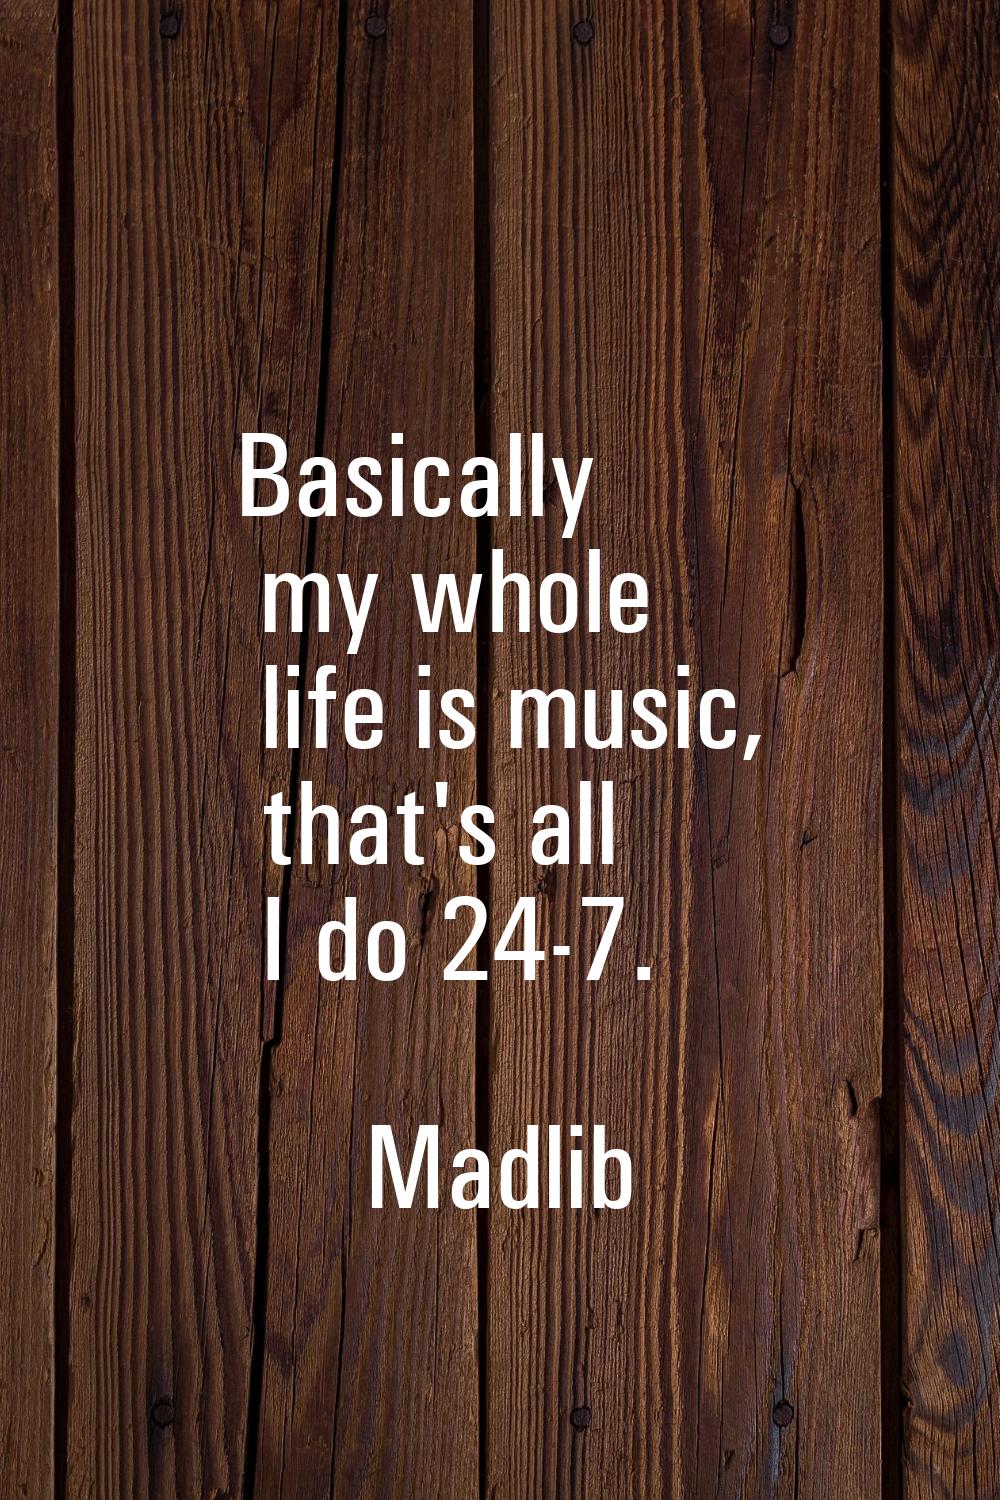 Basically my whole life is music, that's all I do 24-7.